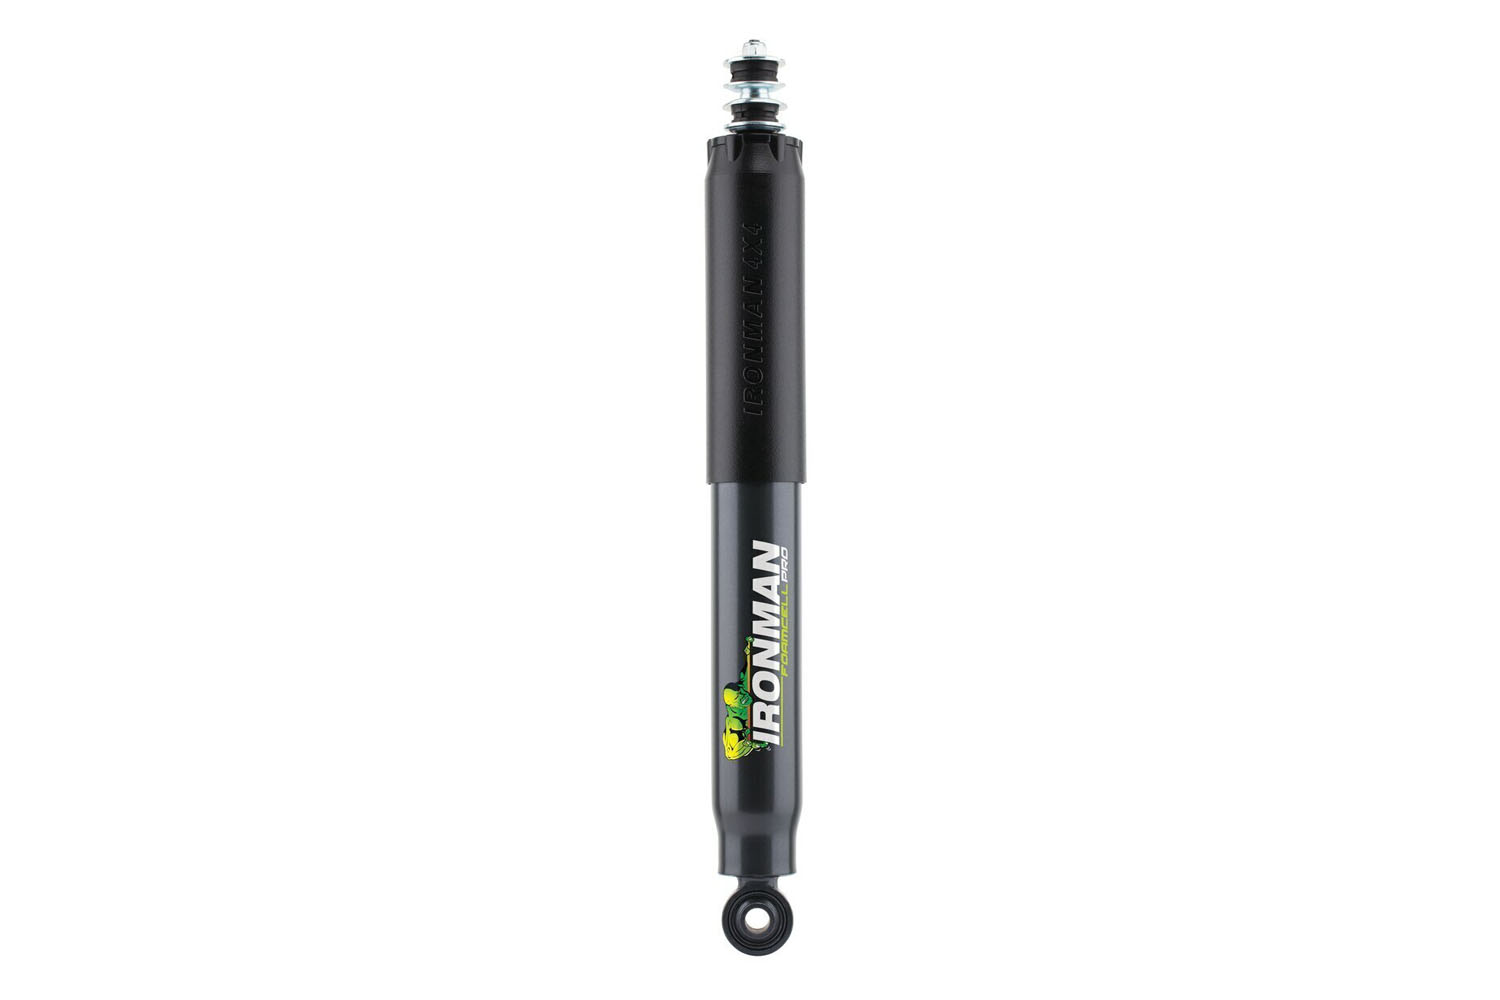 Will these shocks work on a 2001 Toyota 4Runner with stock springs?